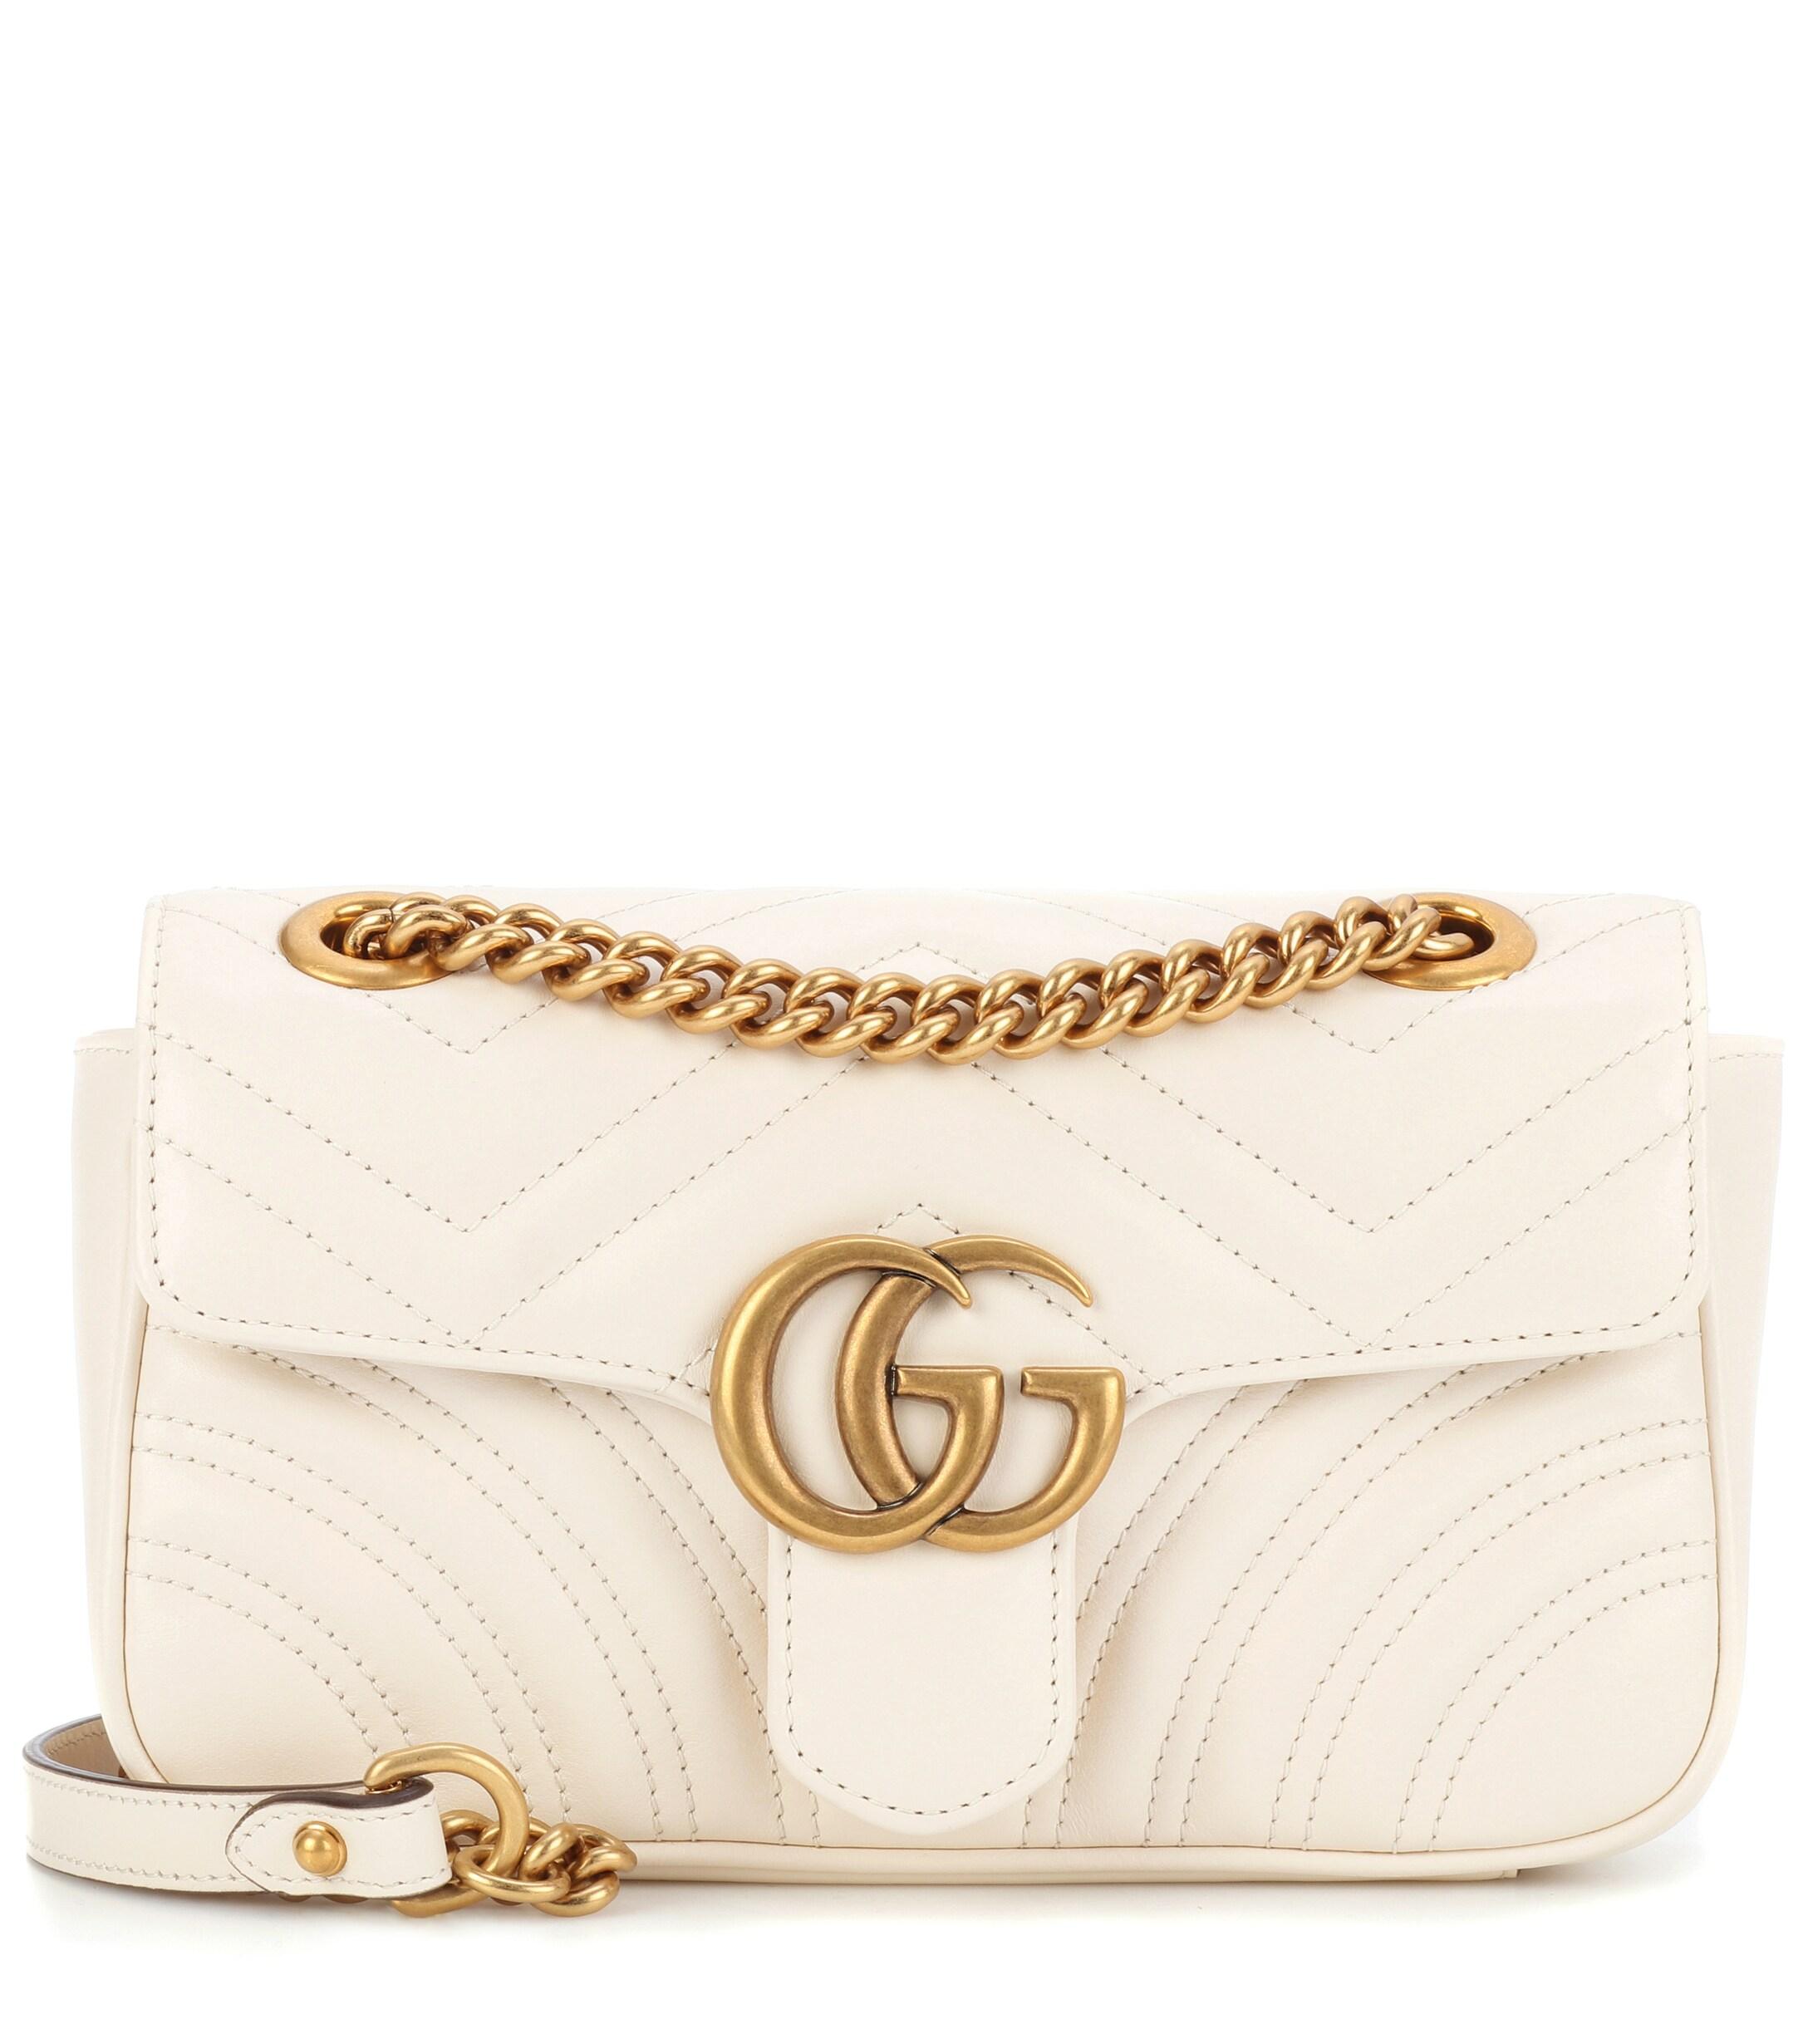 Gucci Leather GG Marmont Matelassé Shoulder Bag in White Leather (White ...